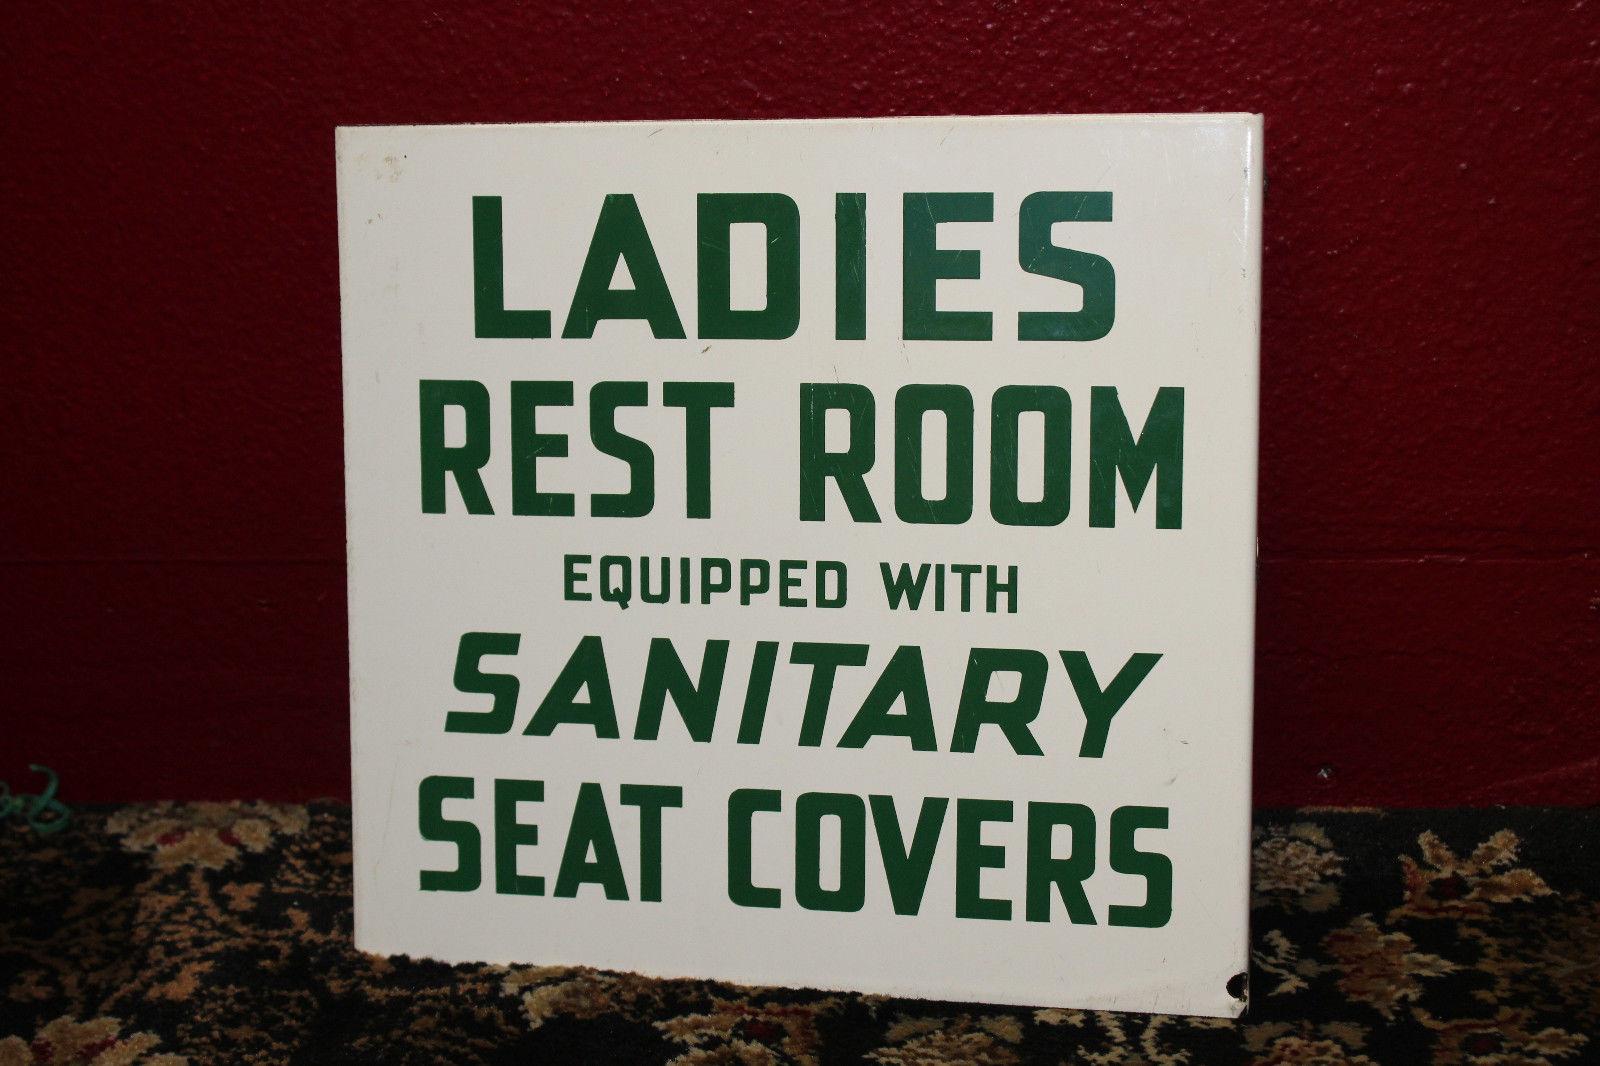 These are signs that hung outside the restrooms back in the 1940s. They made many different styles but this is only one style and sold as a set.